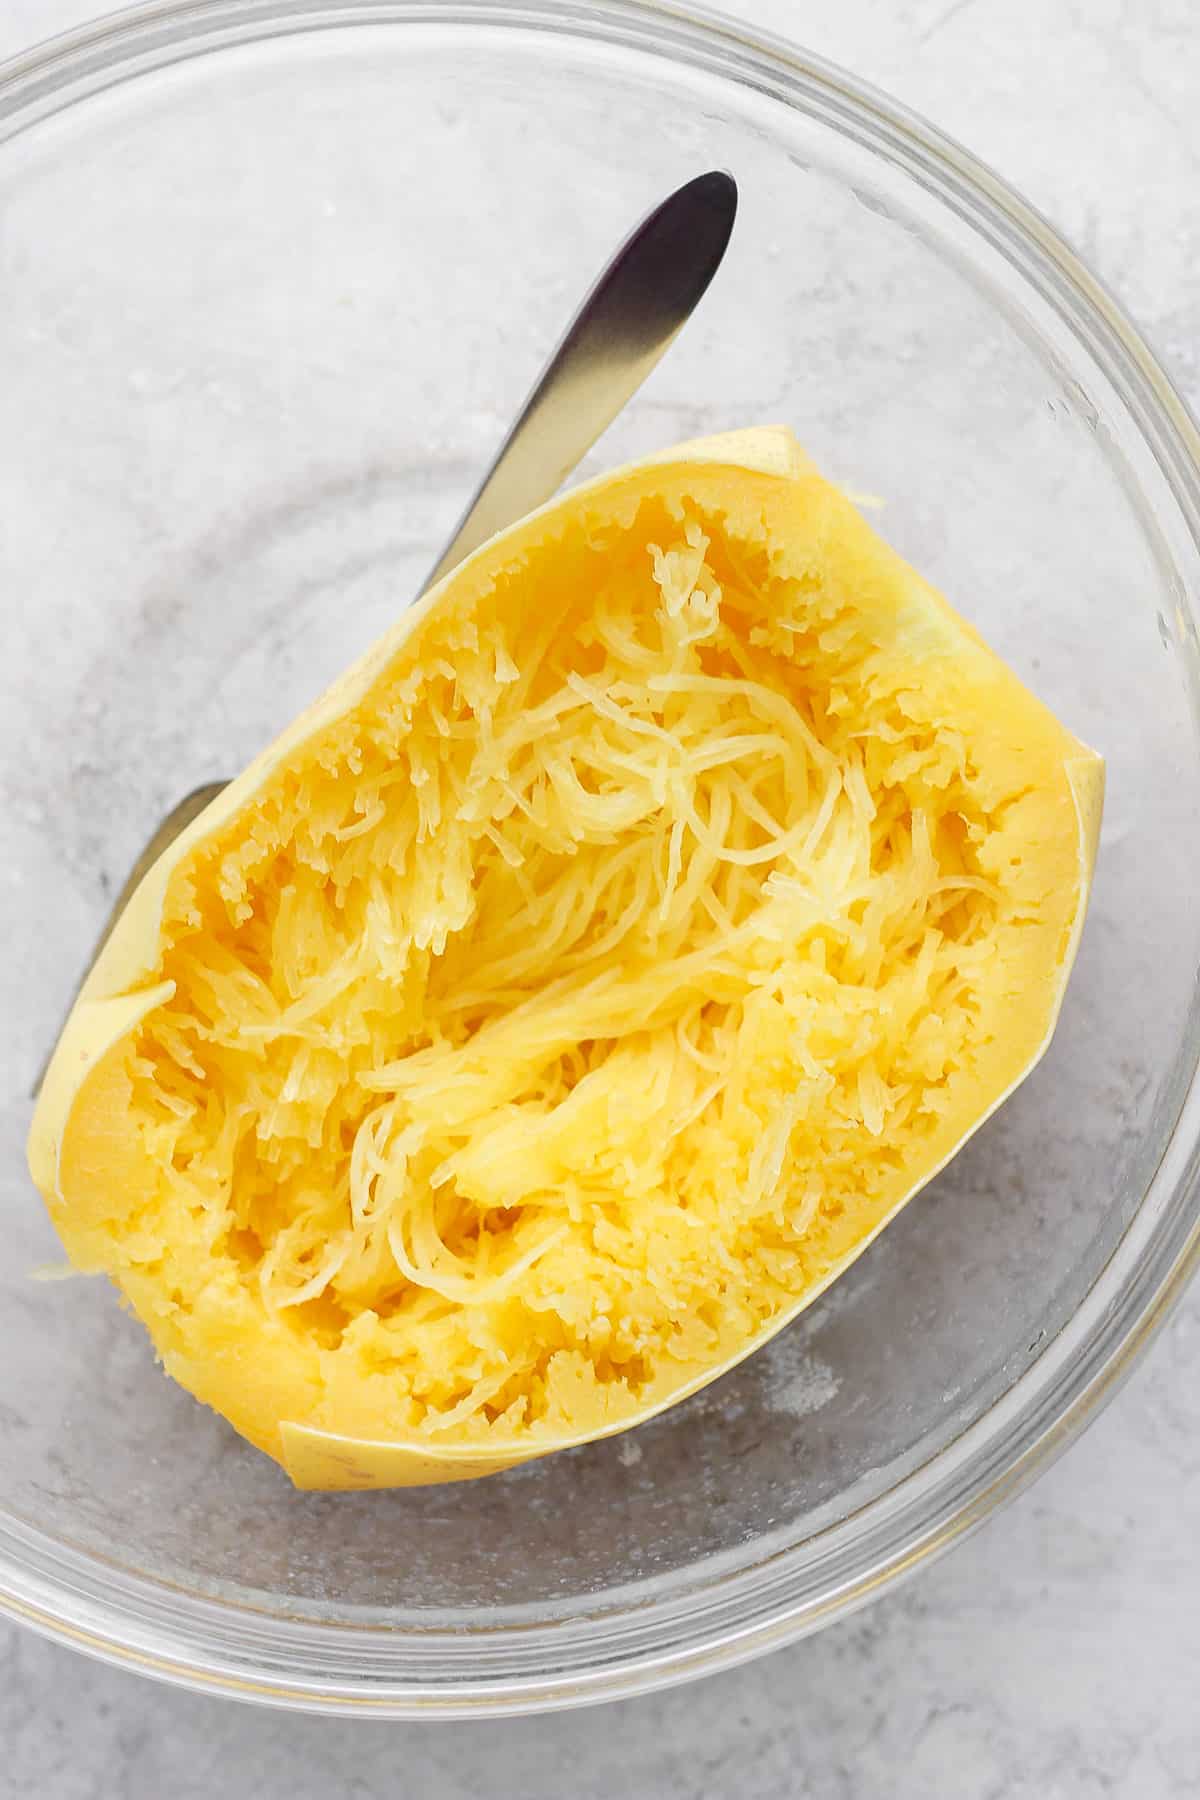 Large bowl with spaghetti squash and fork for pulling strands